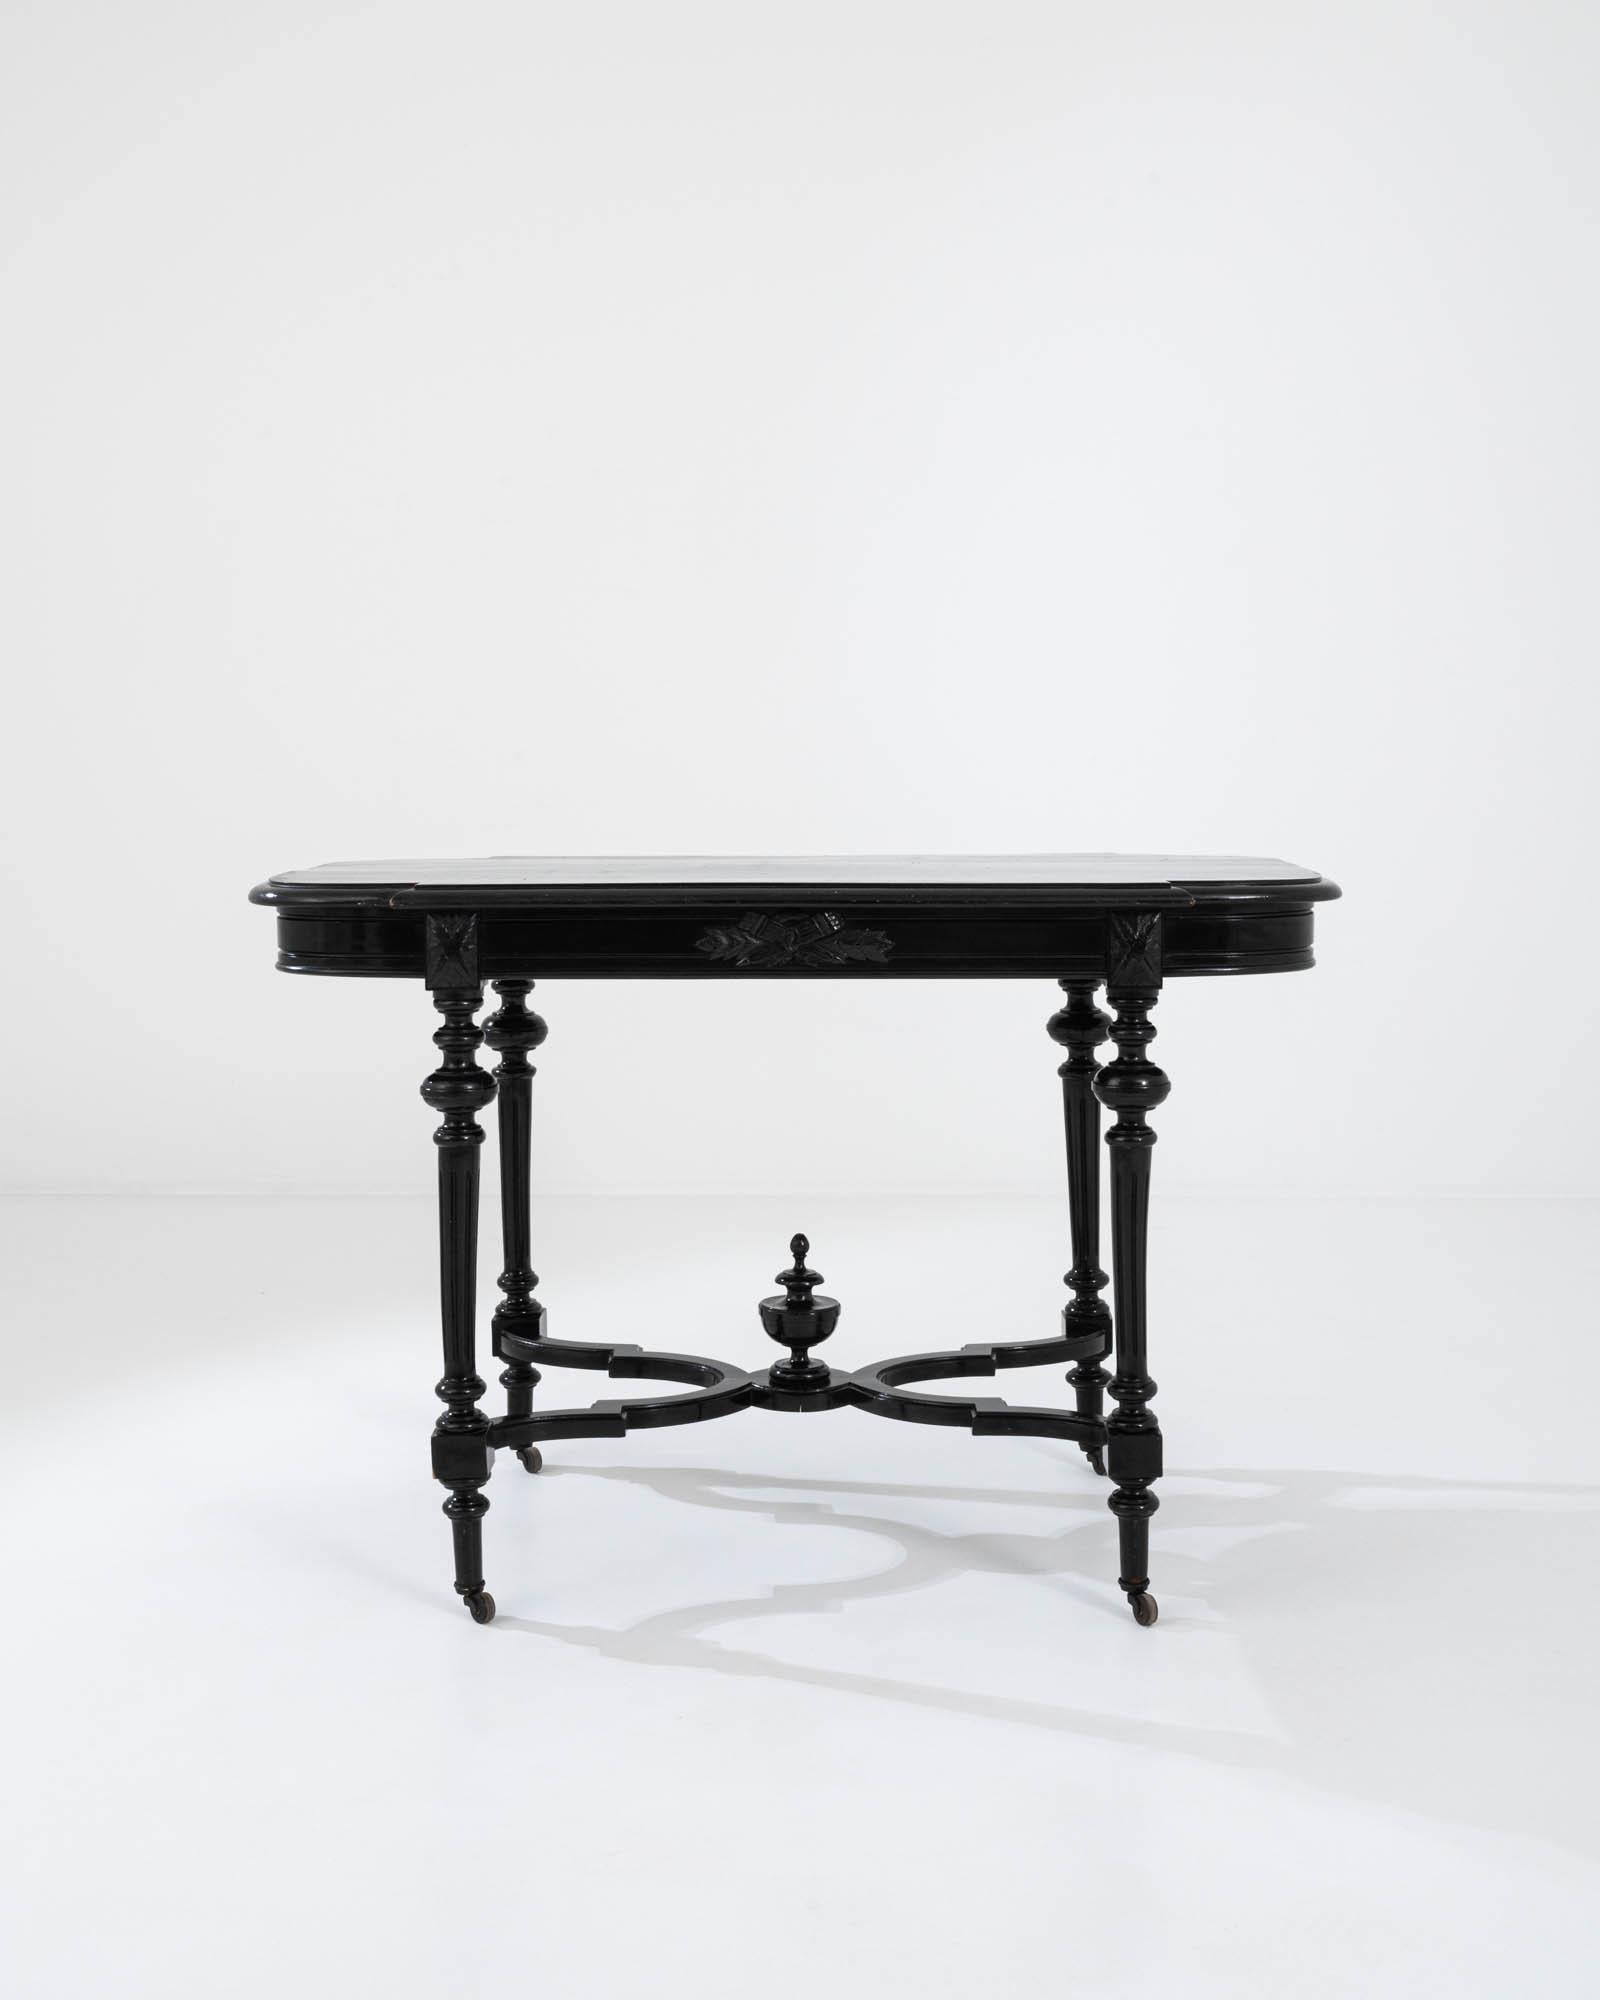 A wooden table on wheels created in 1900s France. A dazzling display of eye-pleasing curves, shapes, and tapering appendages, this classical table beams with astute and formal beauty. The sumptuously lathed legs descend down to gracefully join with